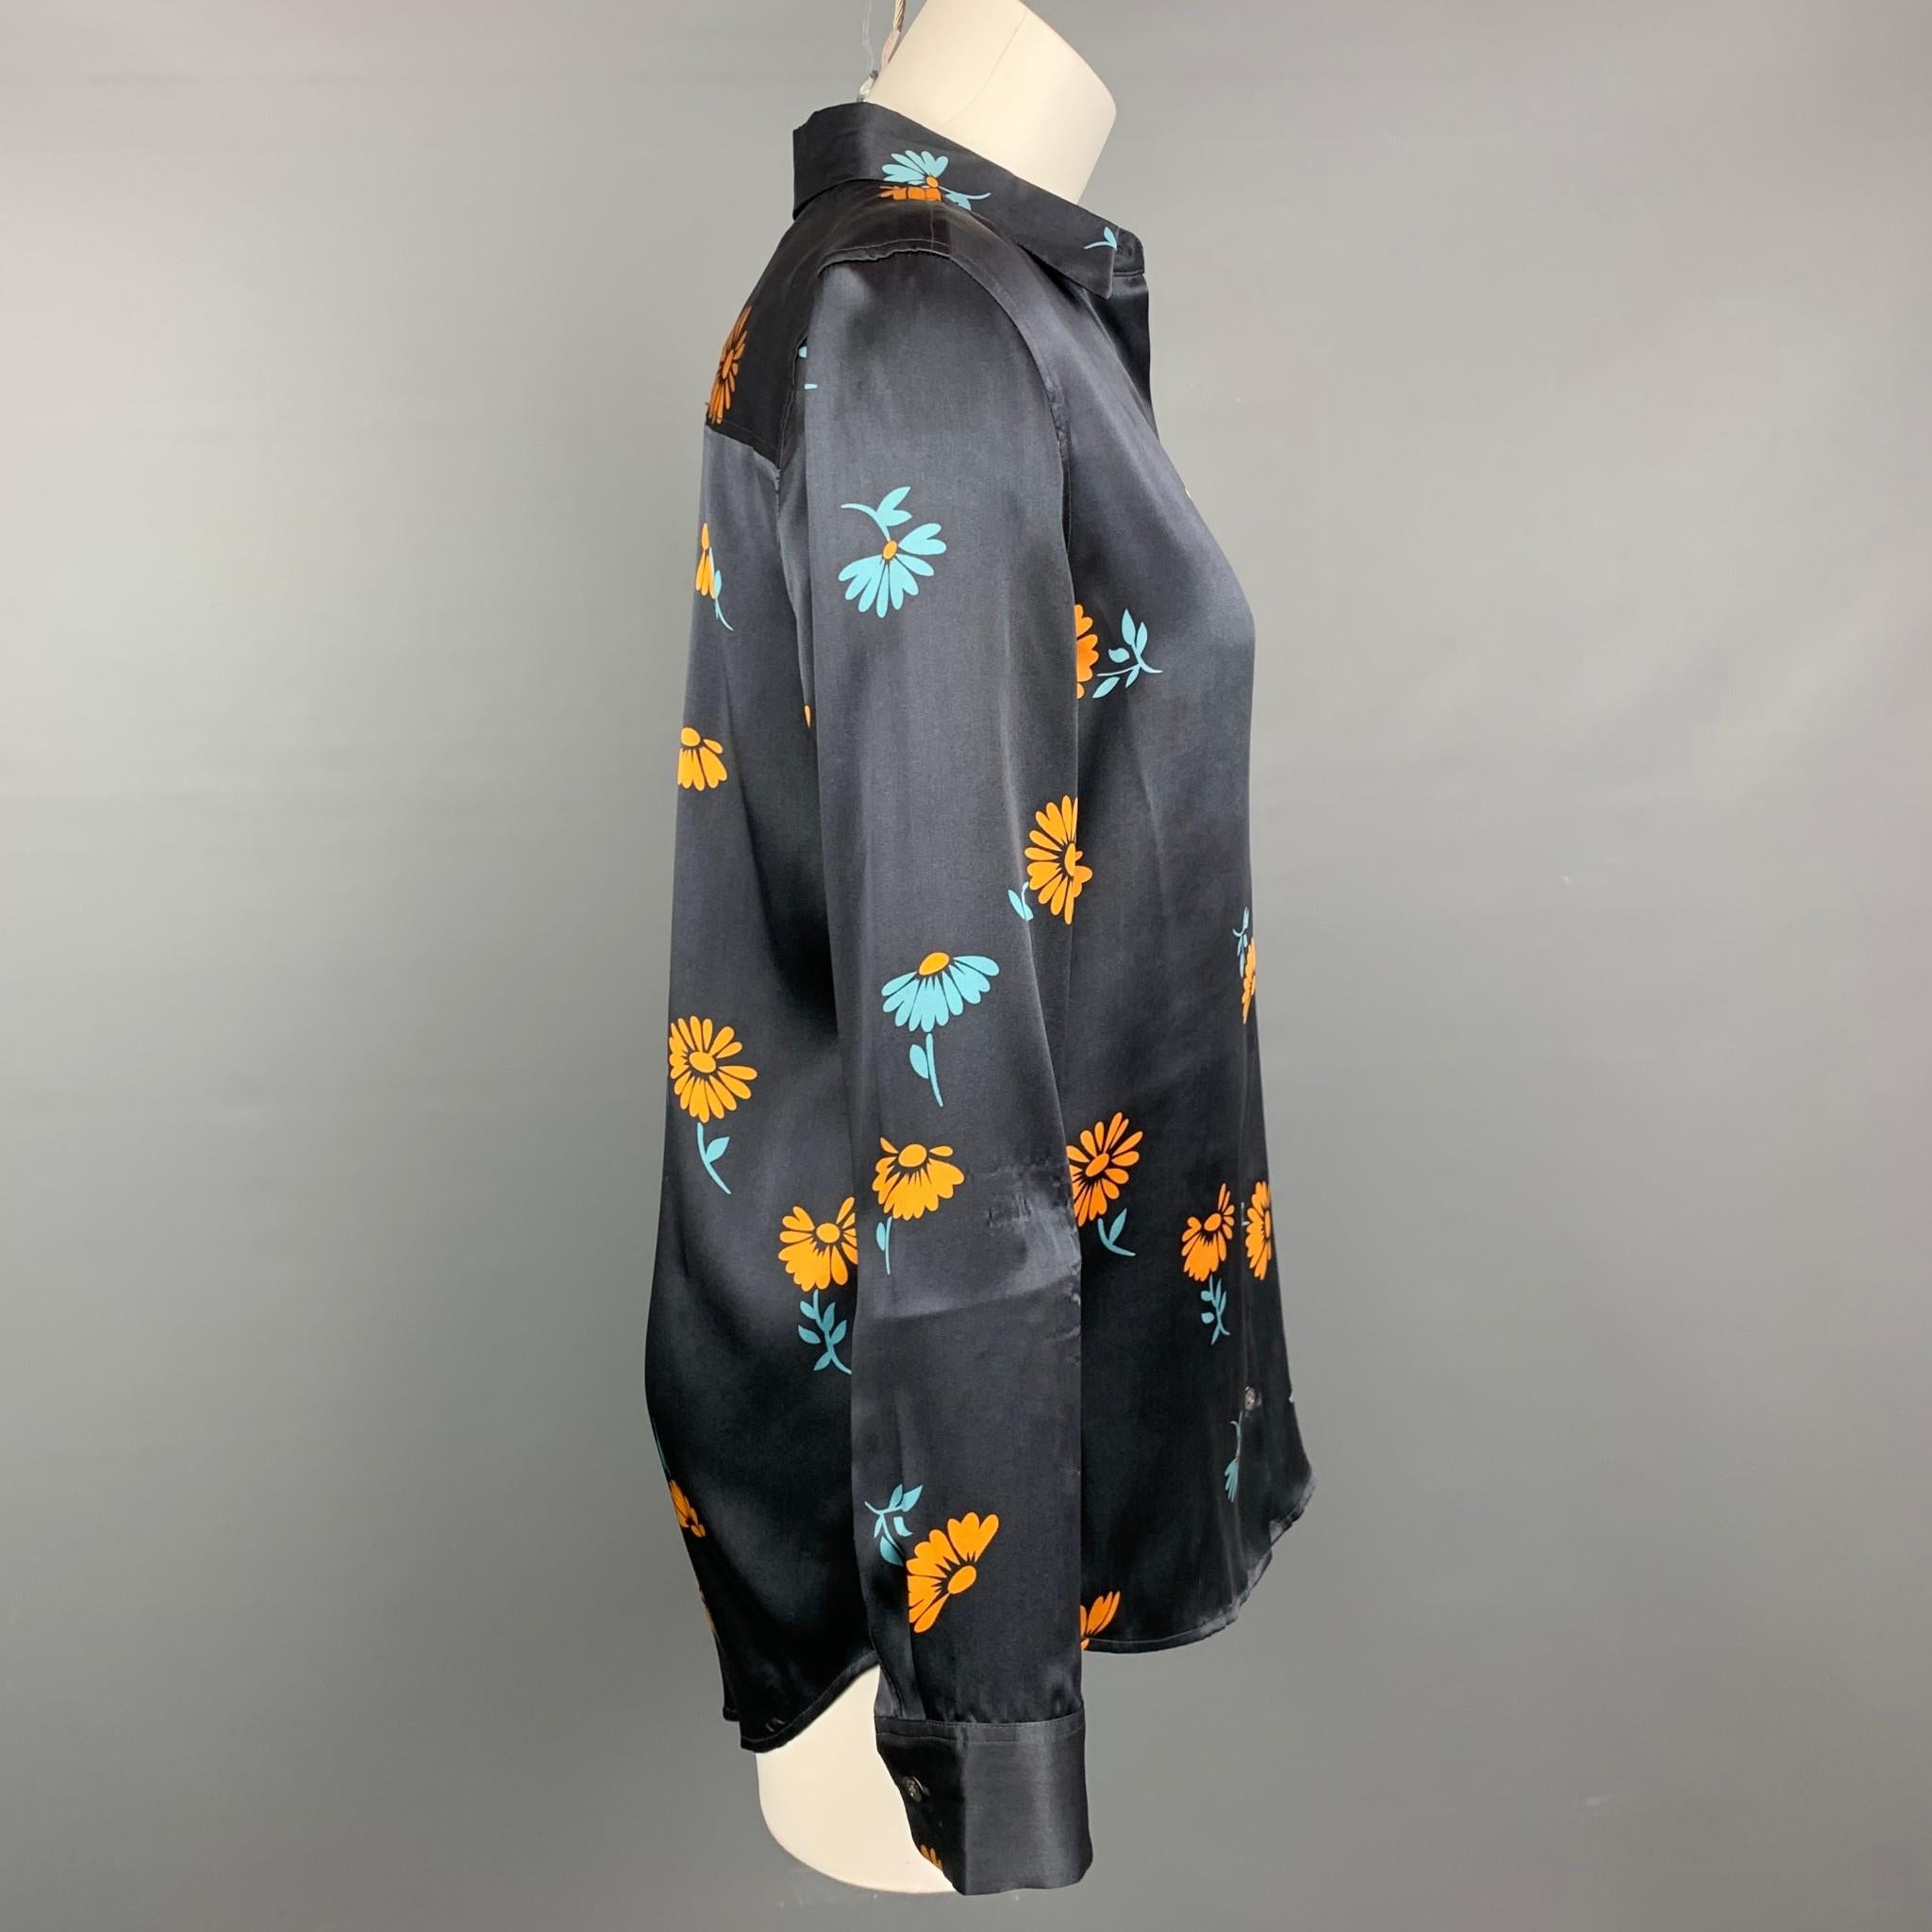 EQUIPMENT blouse comes in a navy & yellow floral silk featuring a pointed collar and a buttoned closure.

Very Good Pre-Owned Condition.
Marked: S

Measurements:

Shoulder: 16 in.
Bust: 38 in.
Sleeve: 24.5 in.
Length: 29 in. 